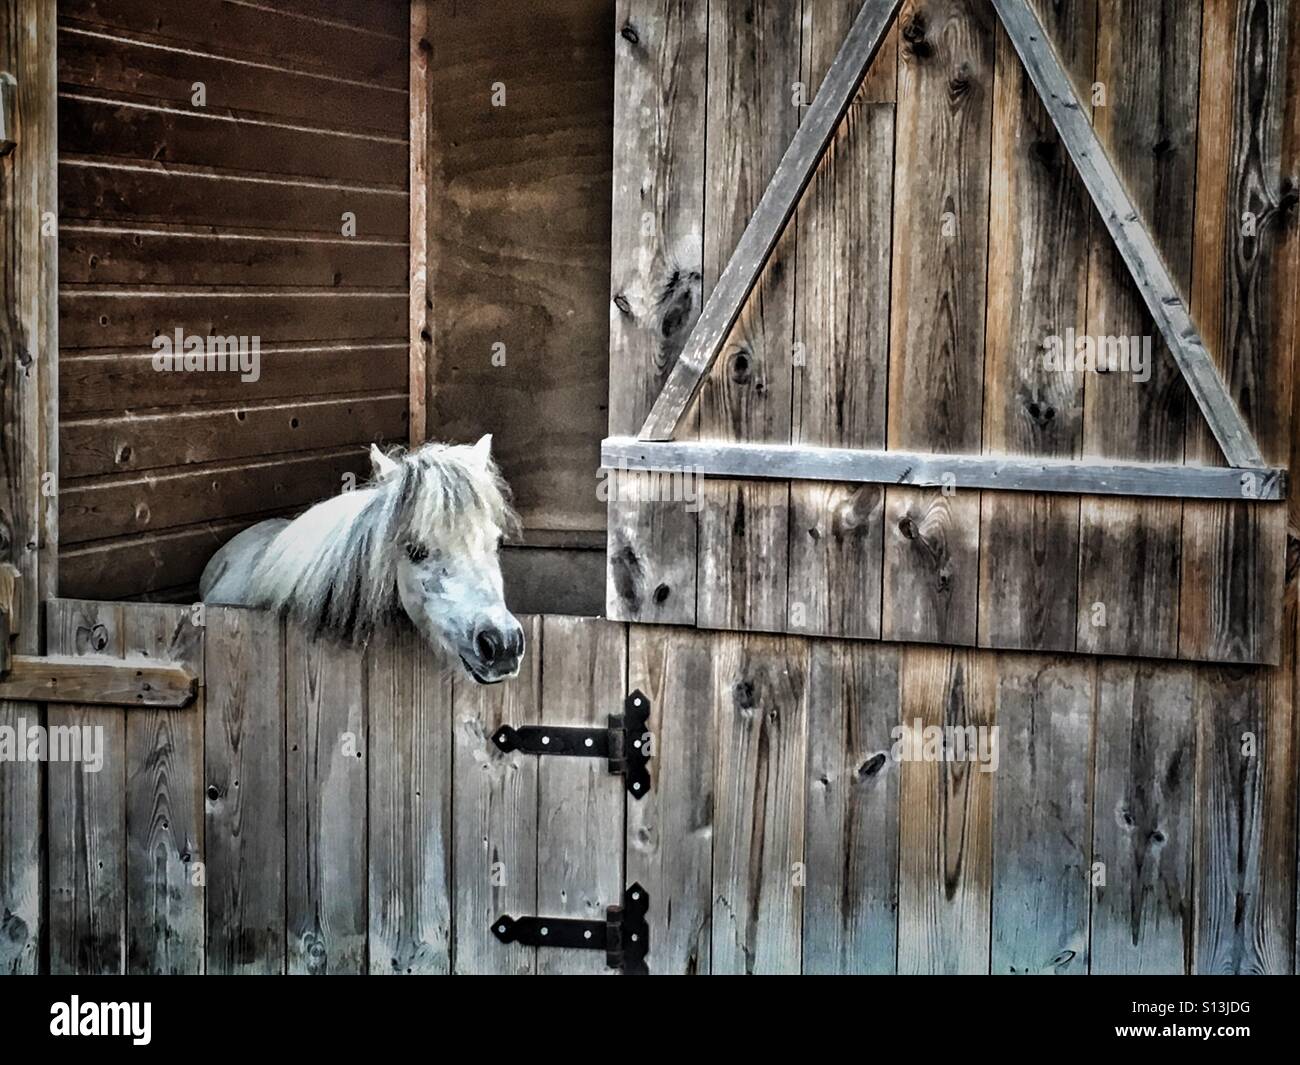 Falabella, miniature horse in stable Stock Photo